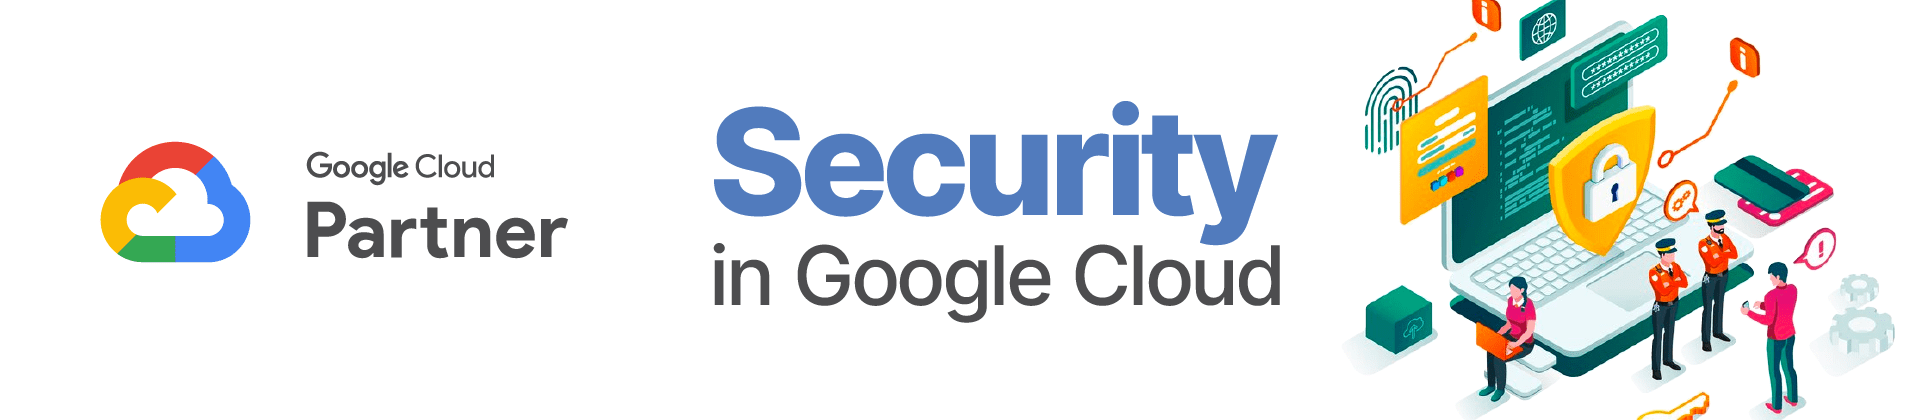 20230616 Security in Google Cloud_highlight 1920x420